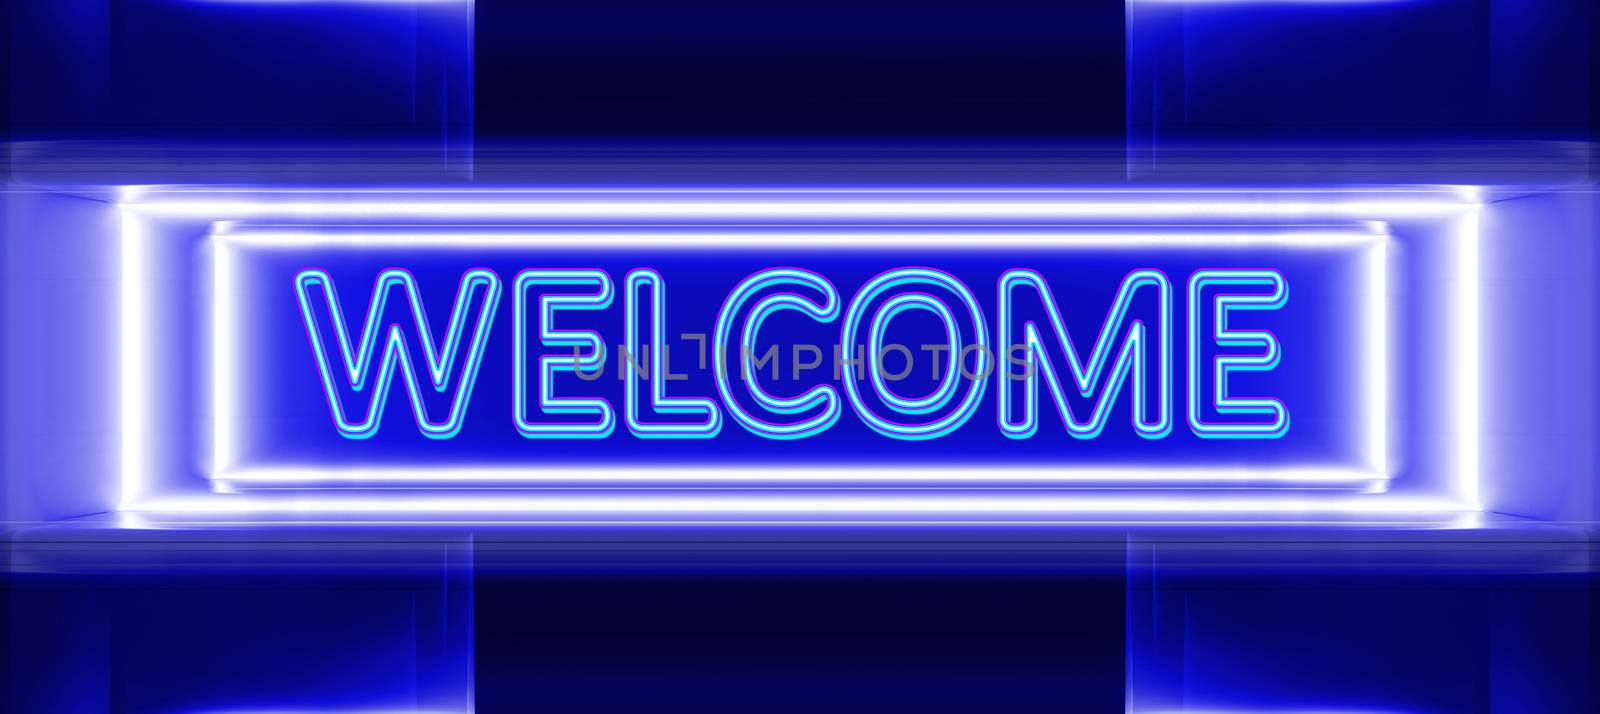 highly technological design of the neon sign of welcome